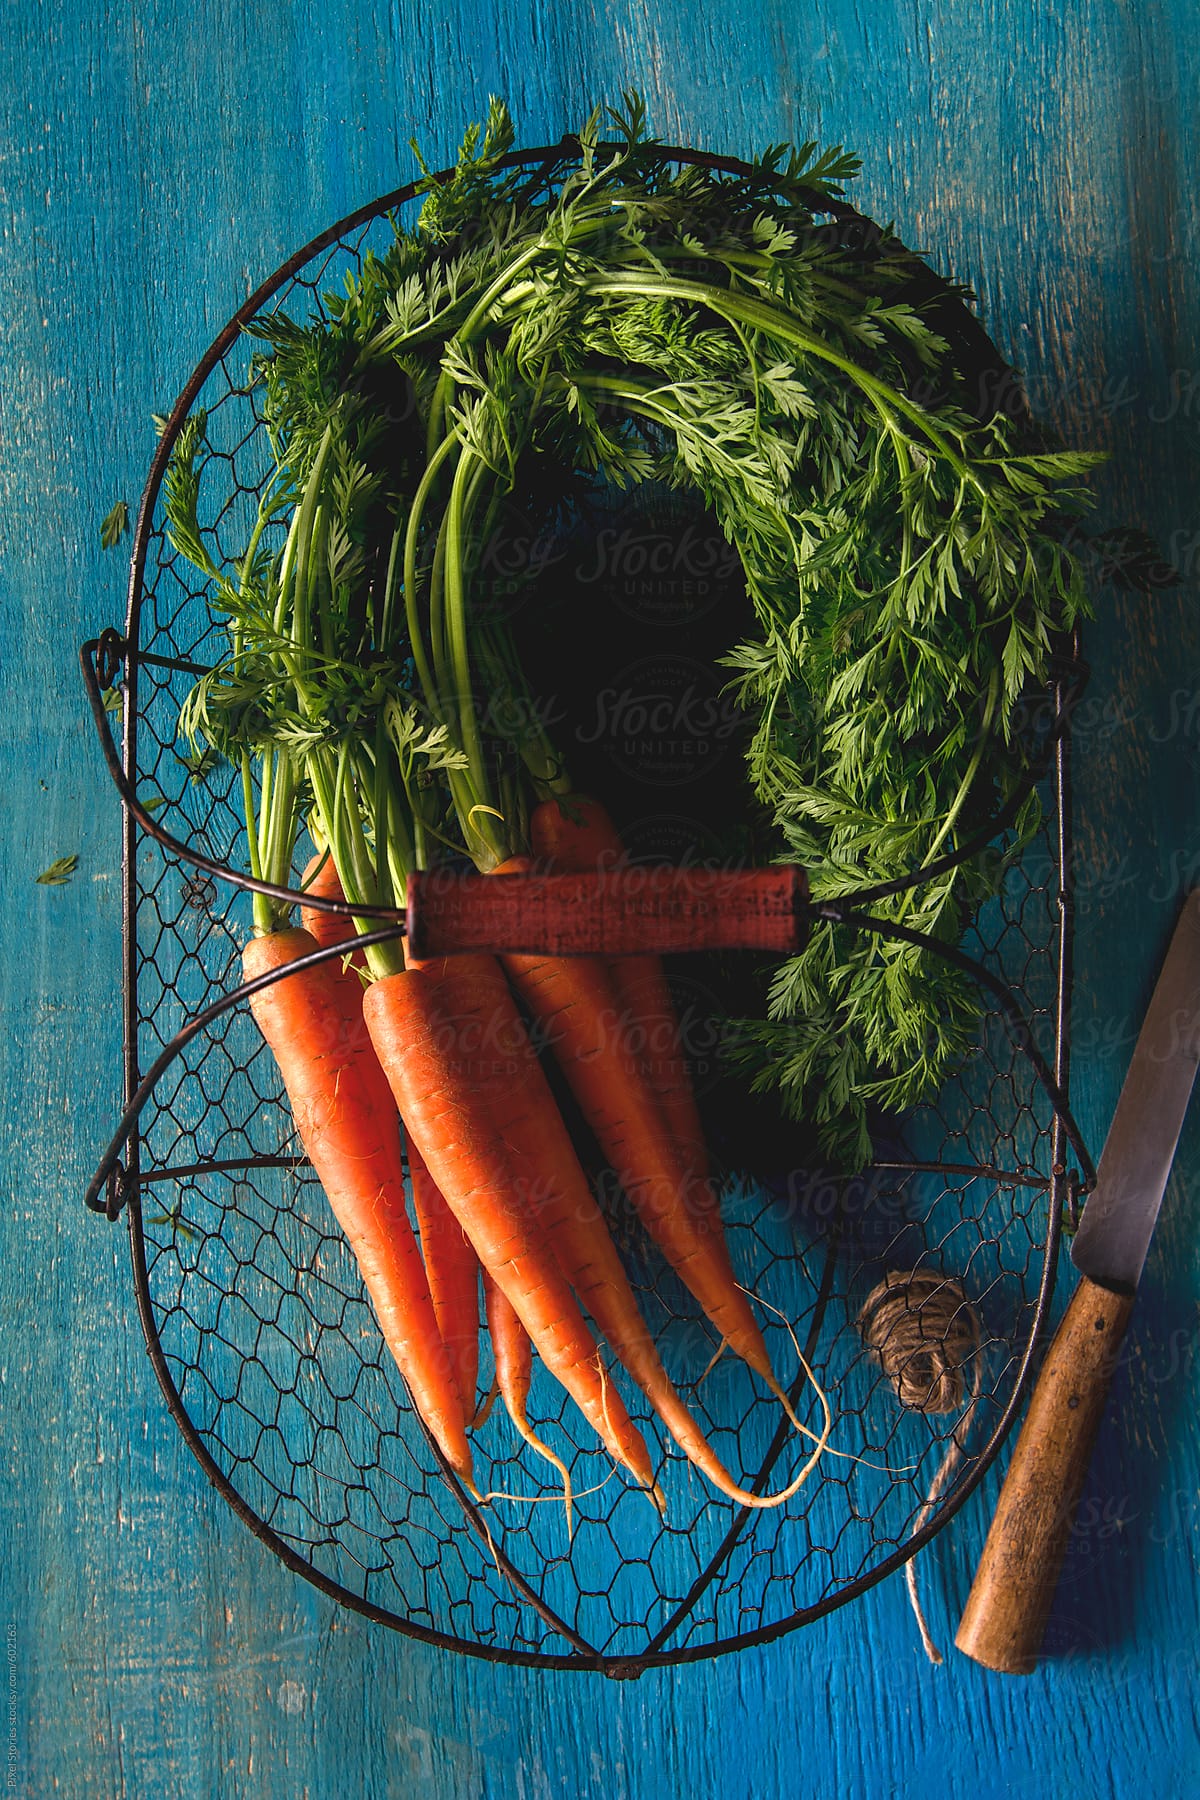 Freshly picked carrots on blue wooden background